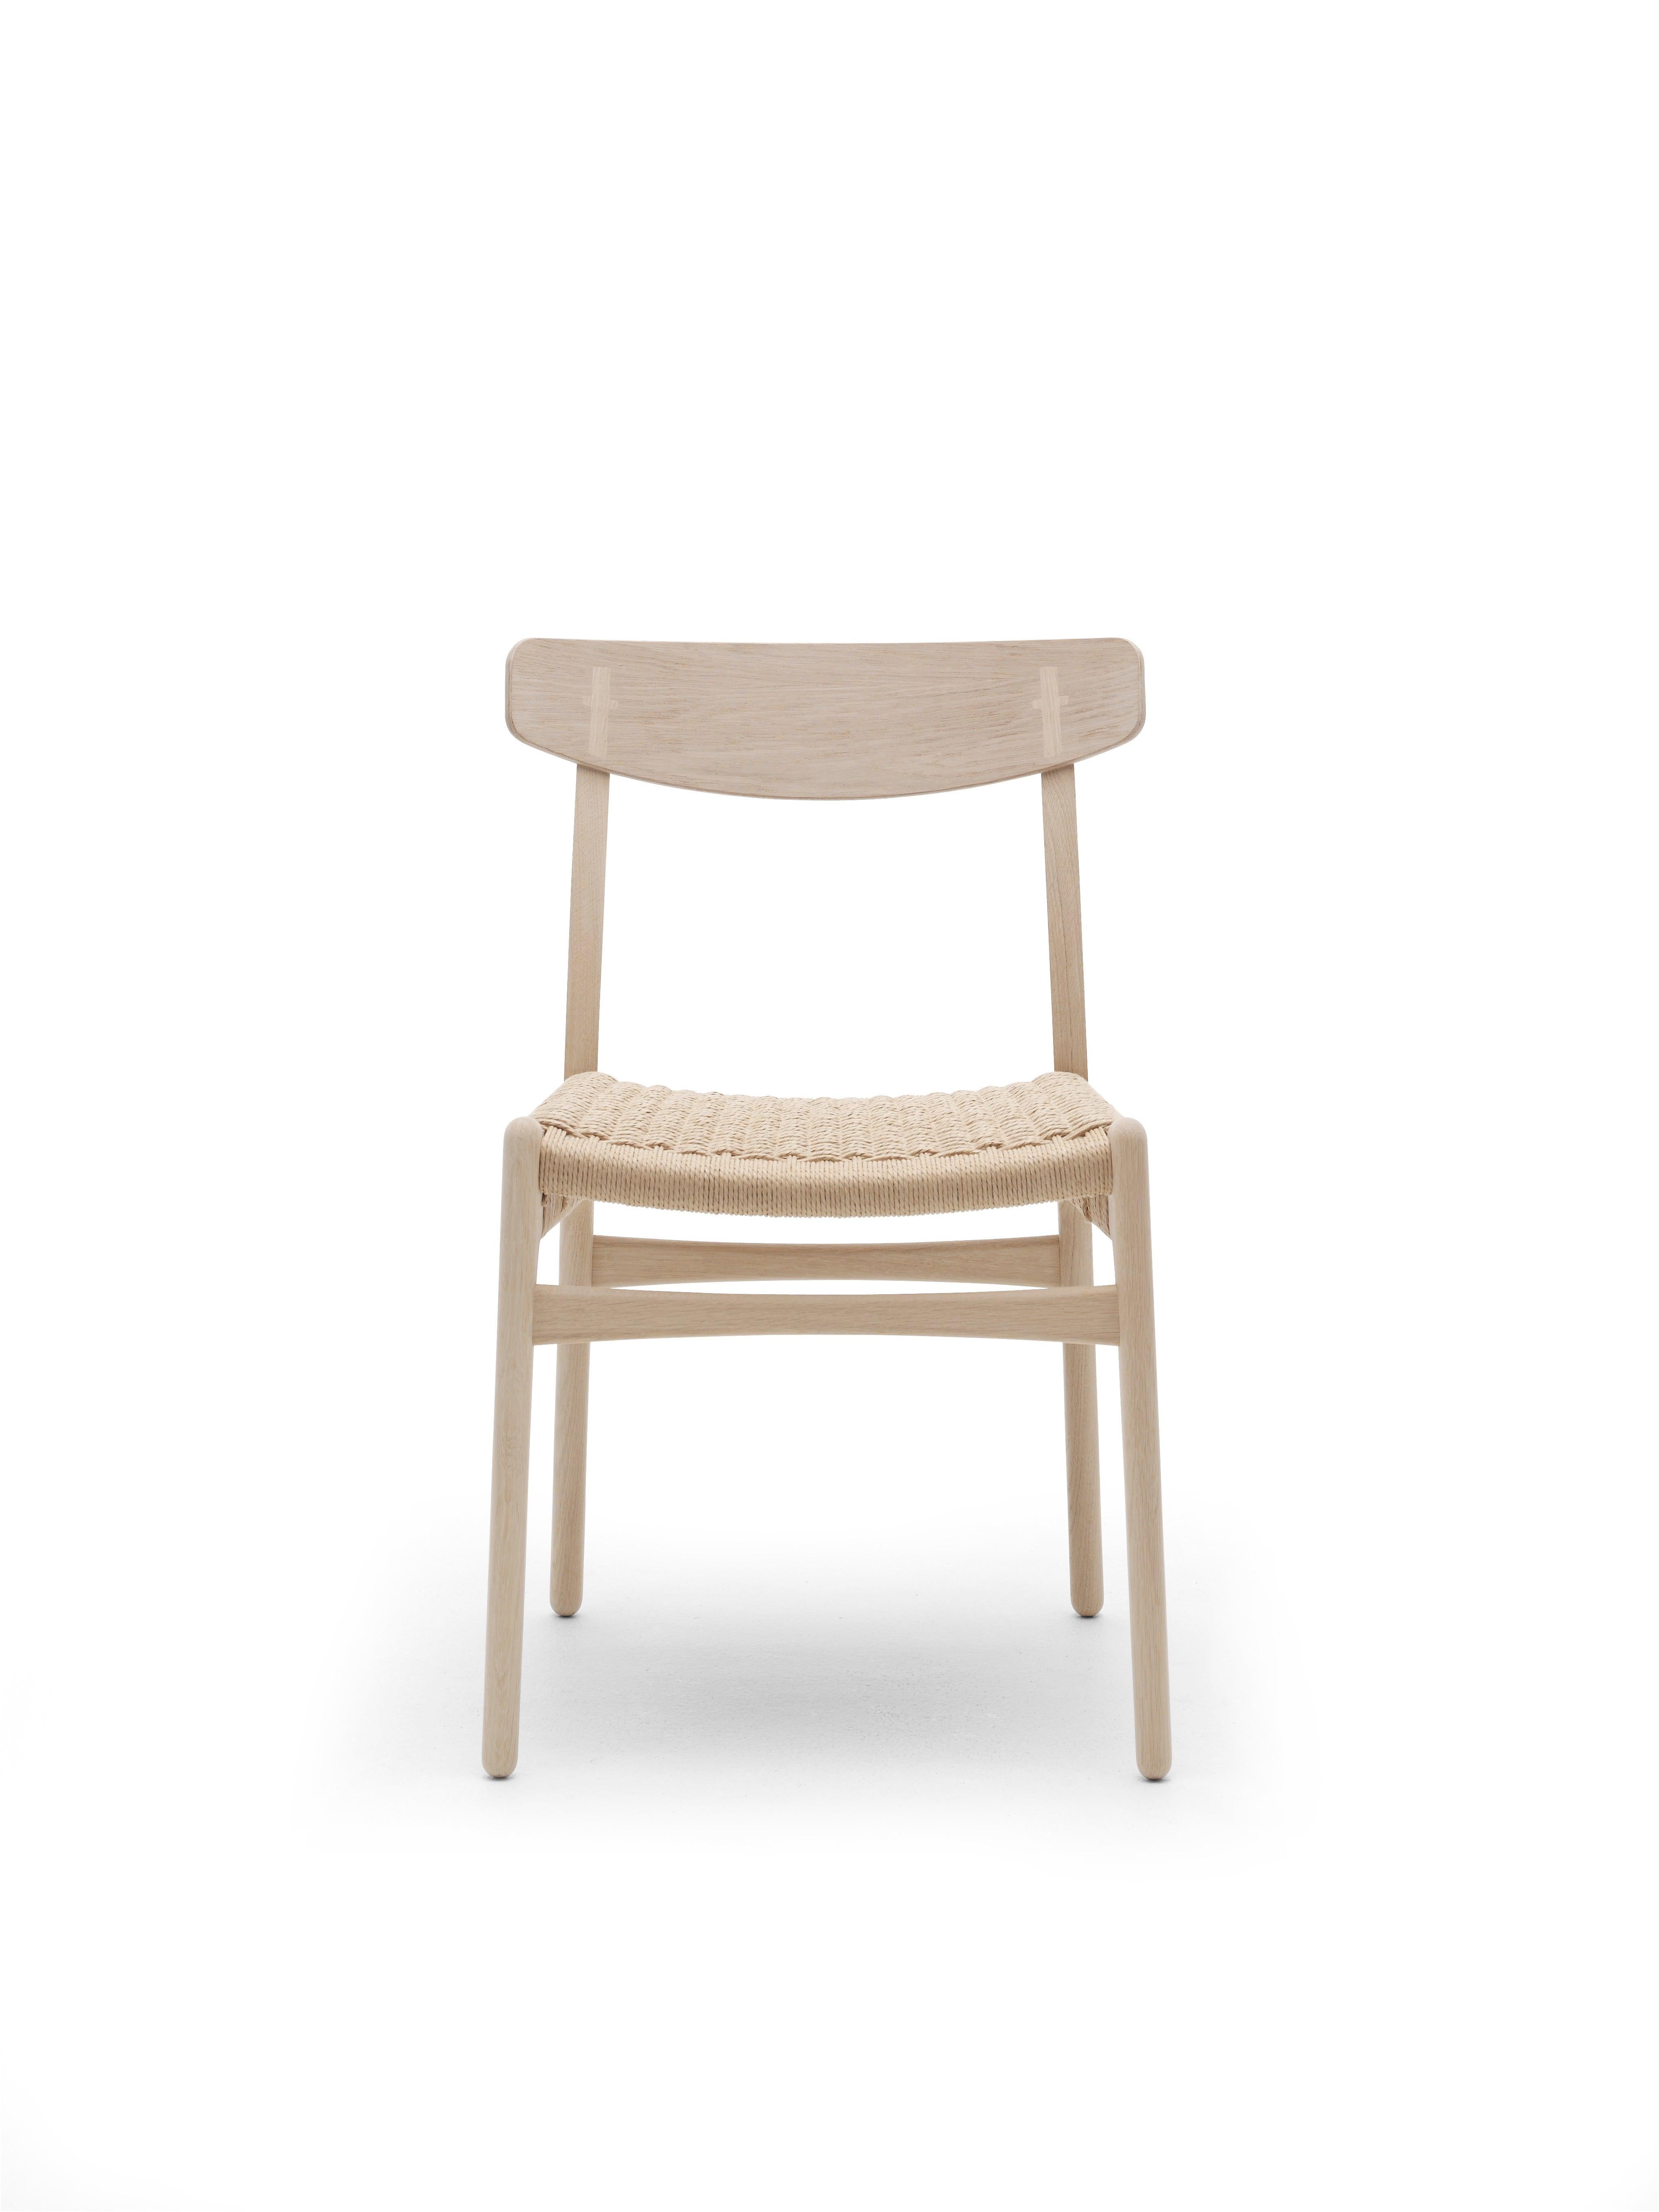 Danish CH23 Dining Chair in Oak Soap with Natural Papercord Seat by Hans J. Wegner